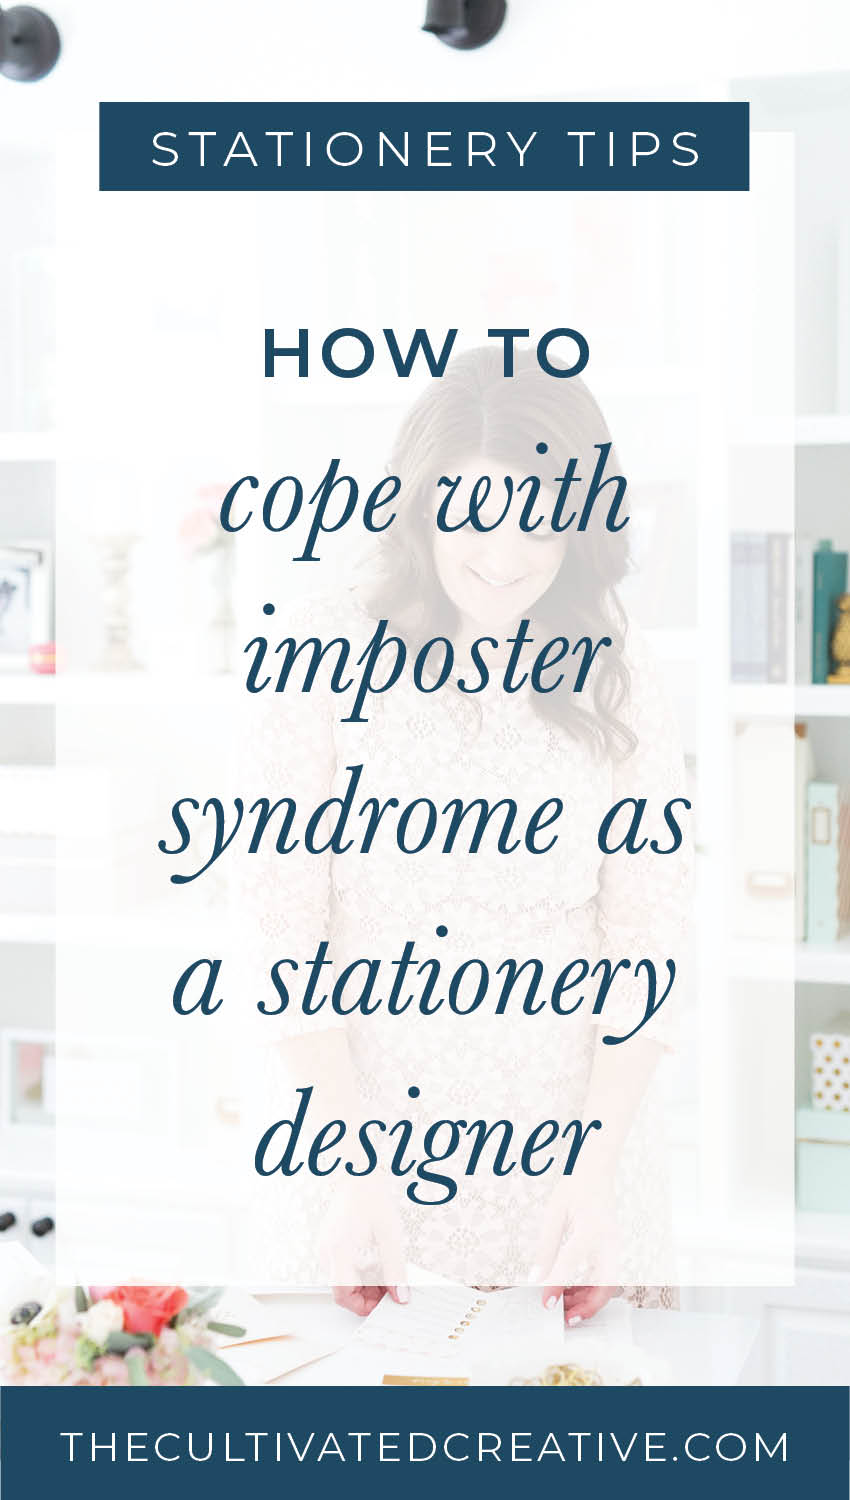 Coping with imposter syndrome as a stationer. How to identify it and be ok with it